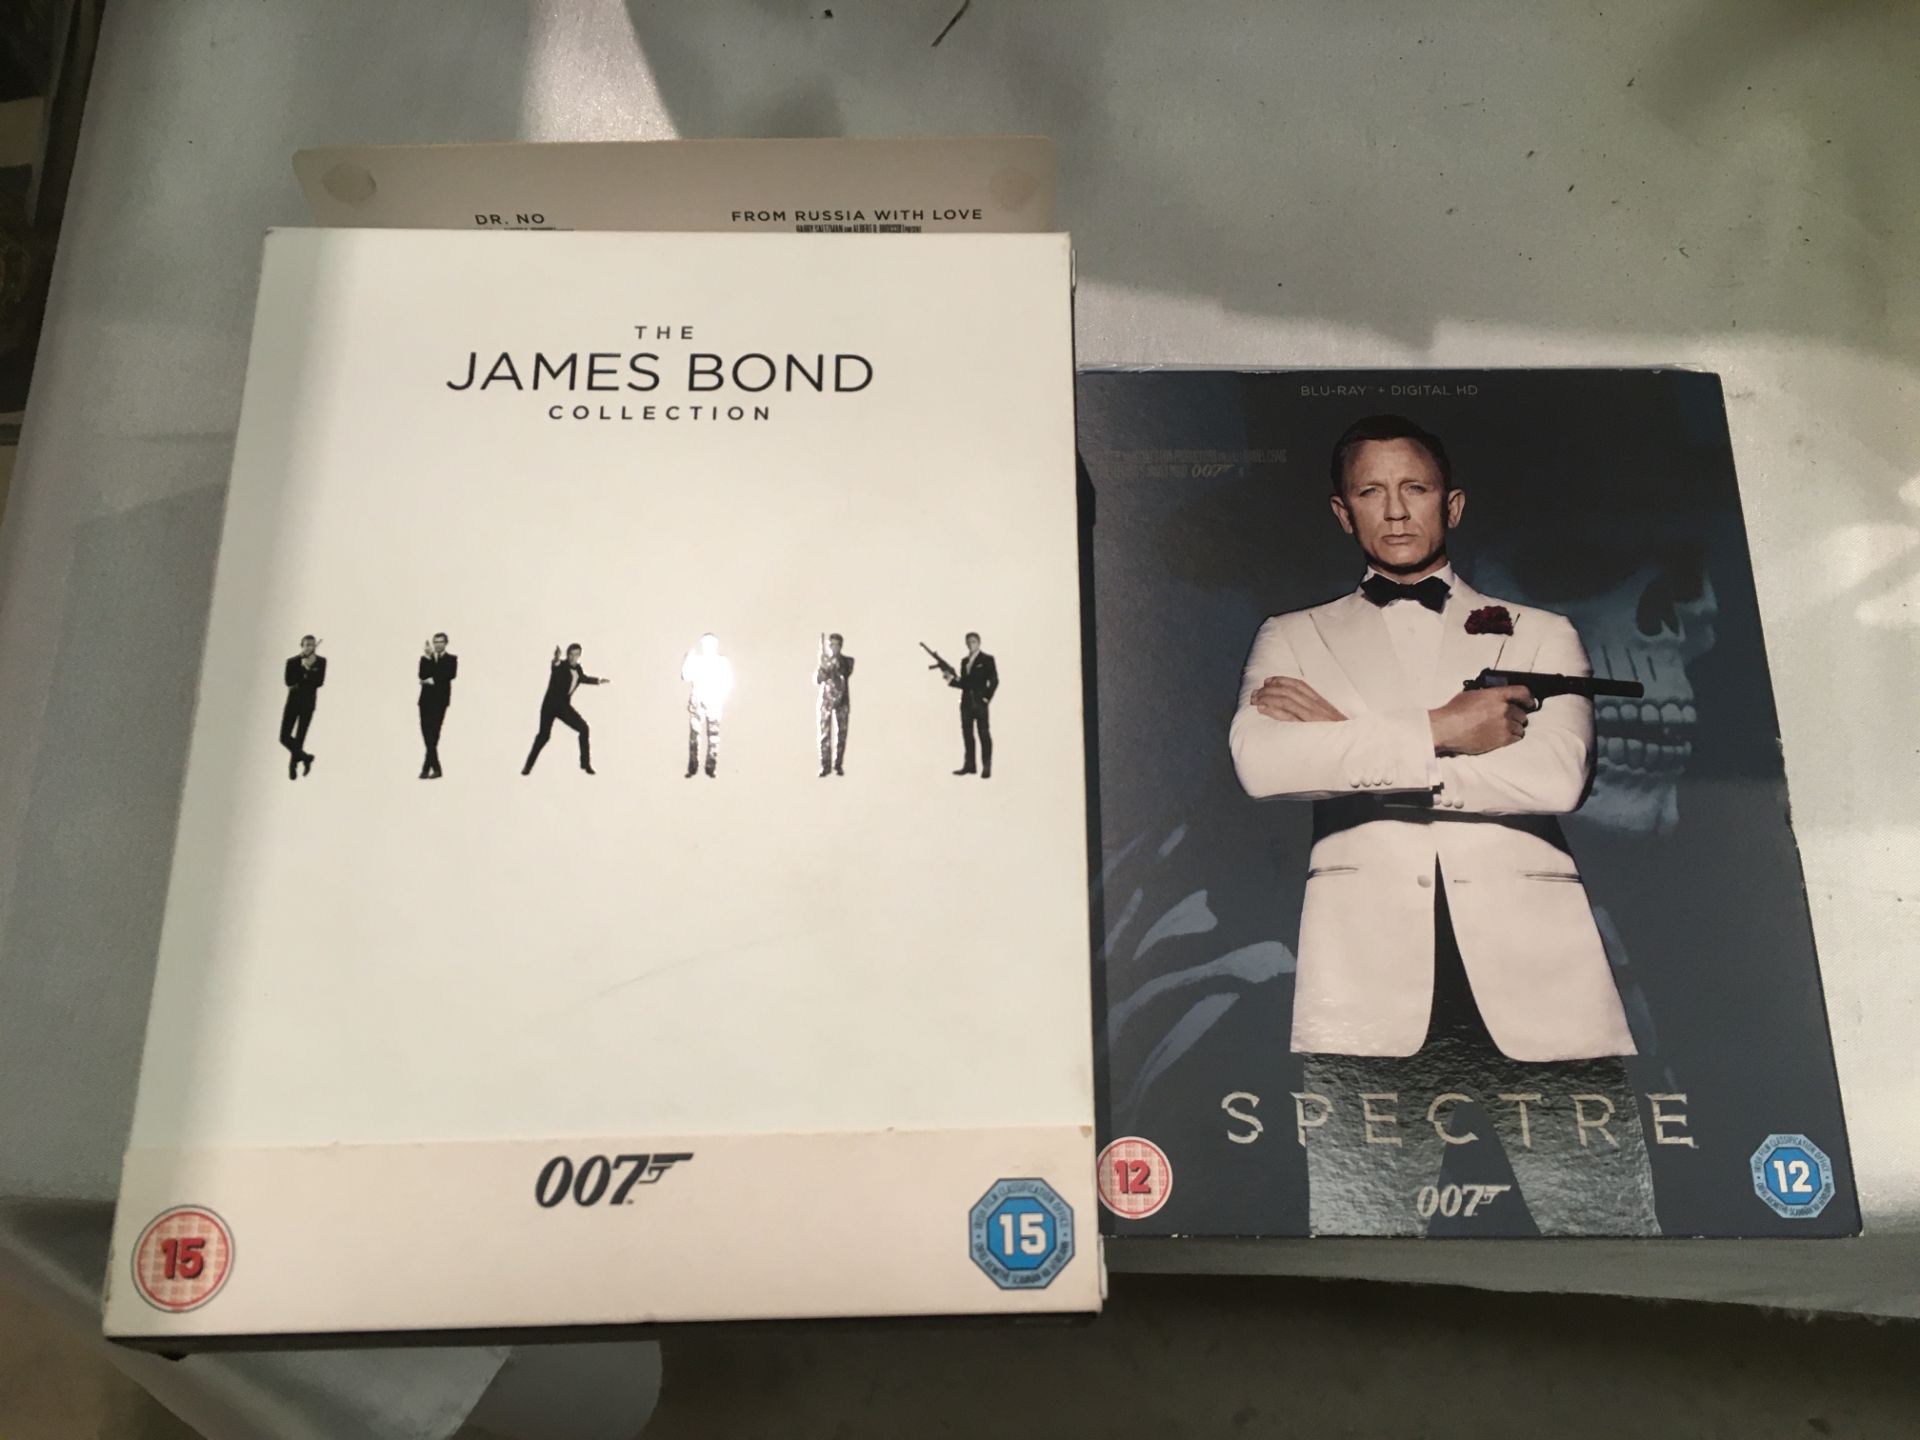 James Bond Collection Blu-ray set and Spectre Blu-ray